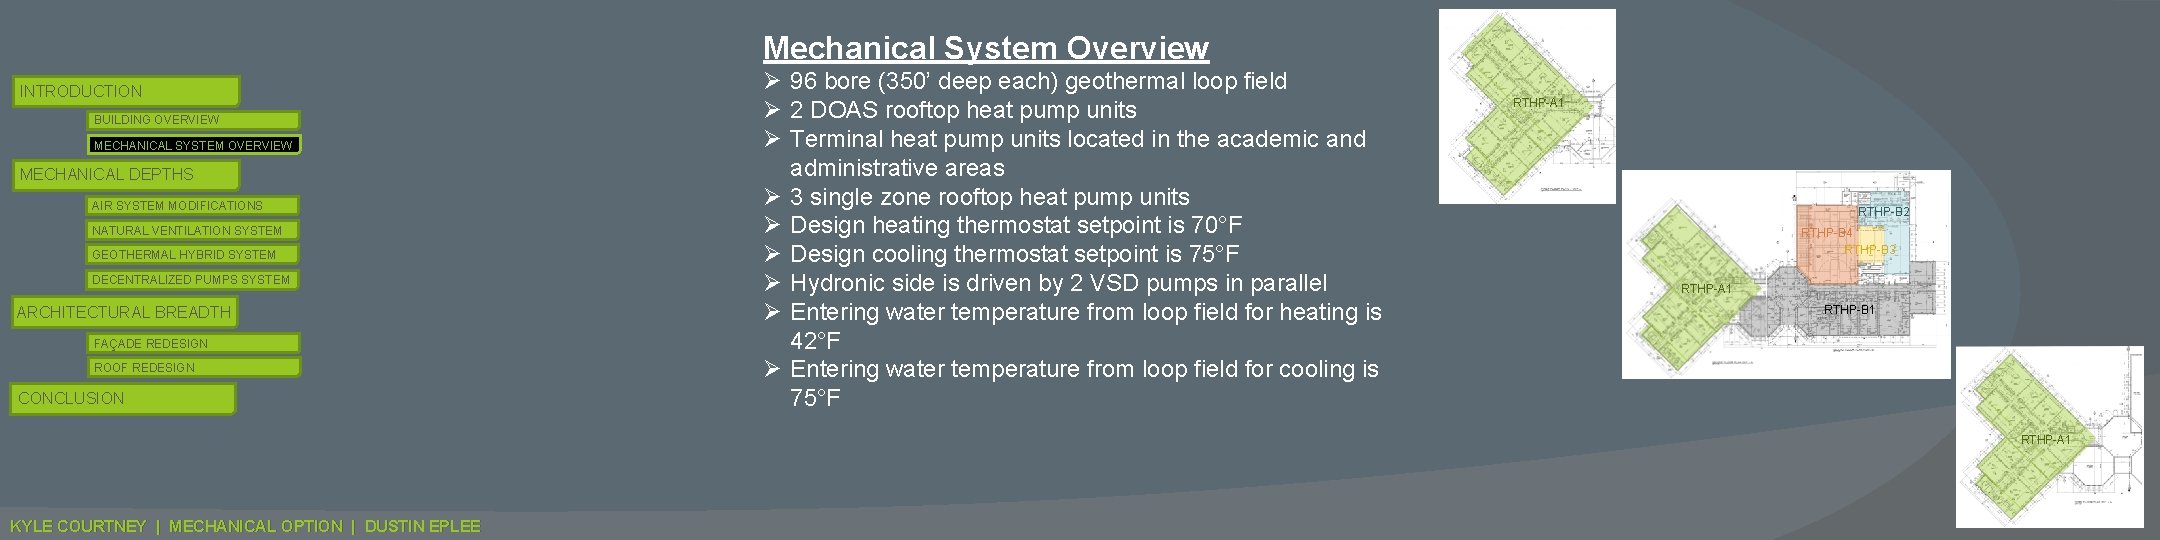 Mechanical System Overview INTRODUCTION BUILDING OVERVIEW MECHANICAL SYSTEM OVERVIEW MECHANICAL DEPTHS AIR SYSTEM MODIFICATIONS